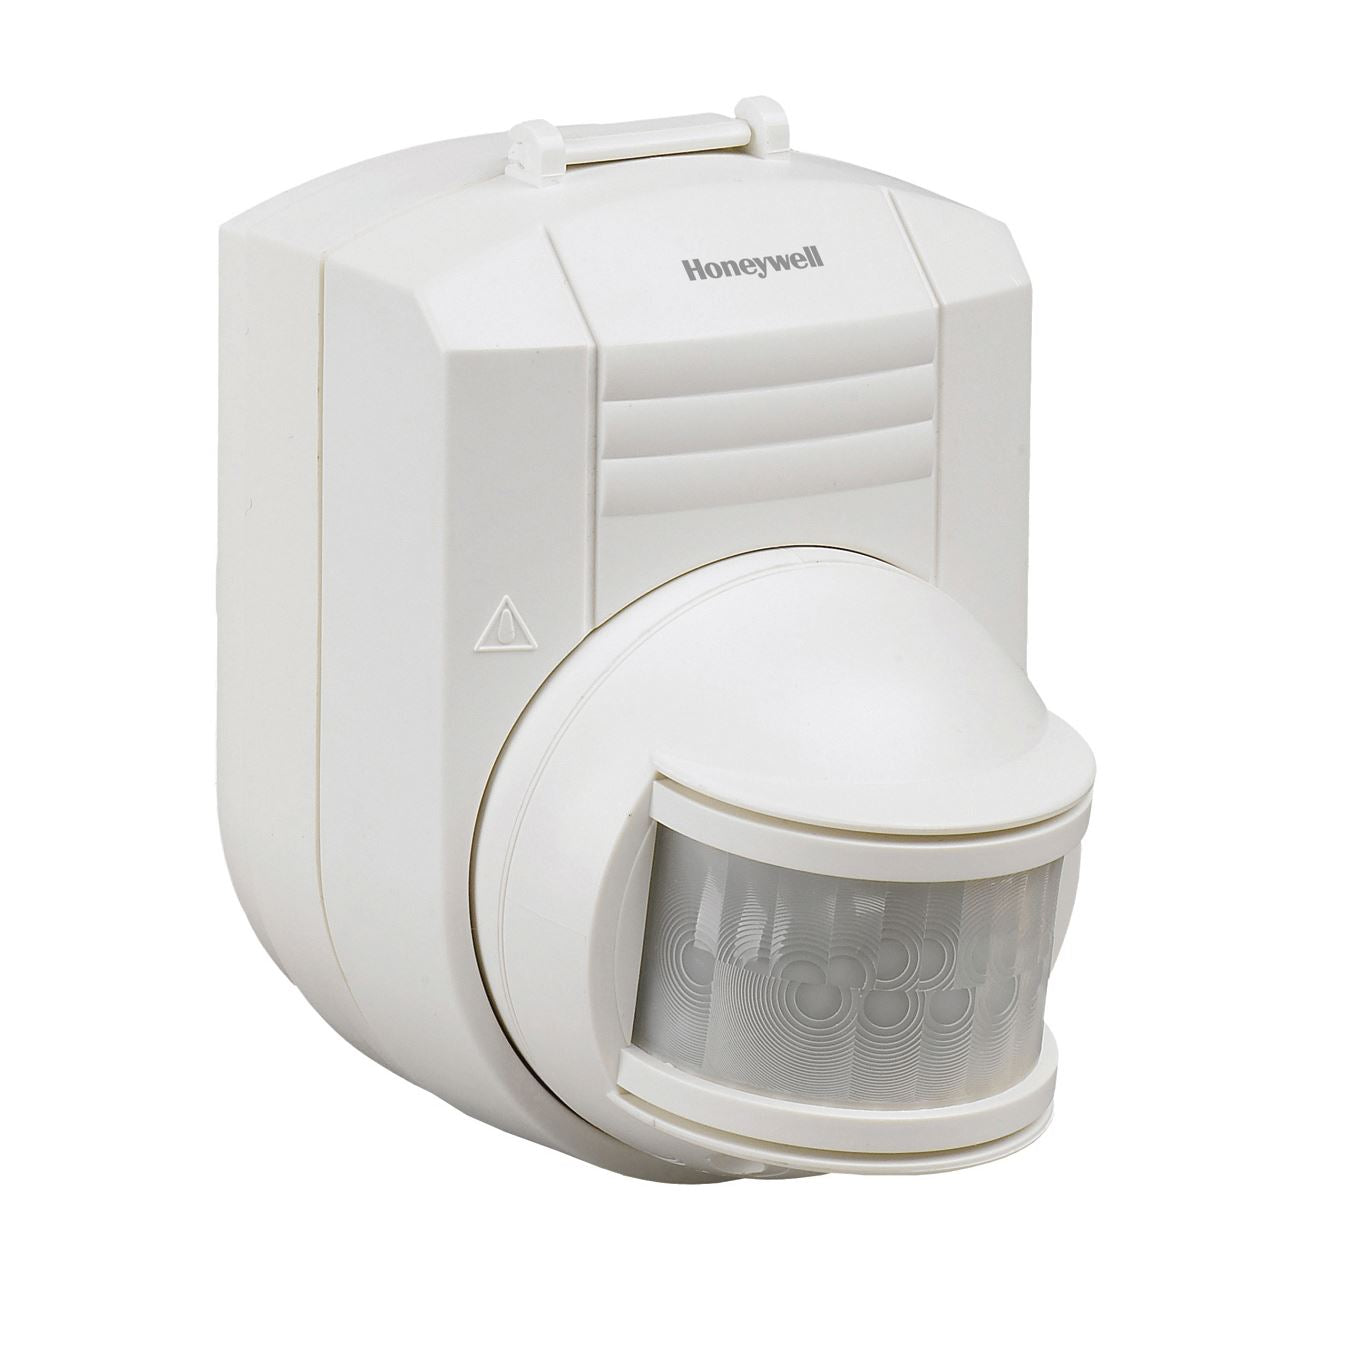 HONEYWELL_Wireless_Motion_Detector._IP54._Motion_Sensor_up_to_40_Feet._Easy_DIY_Installation,_Designed_for_Indoor_or_Outdoor_Use.